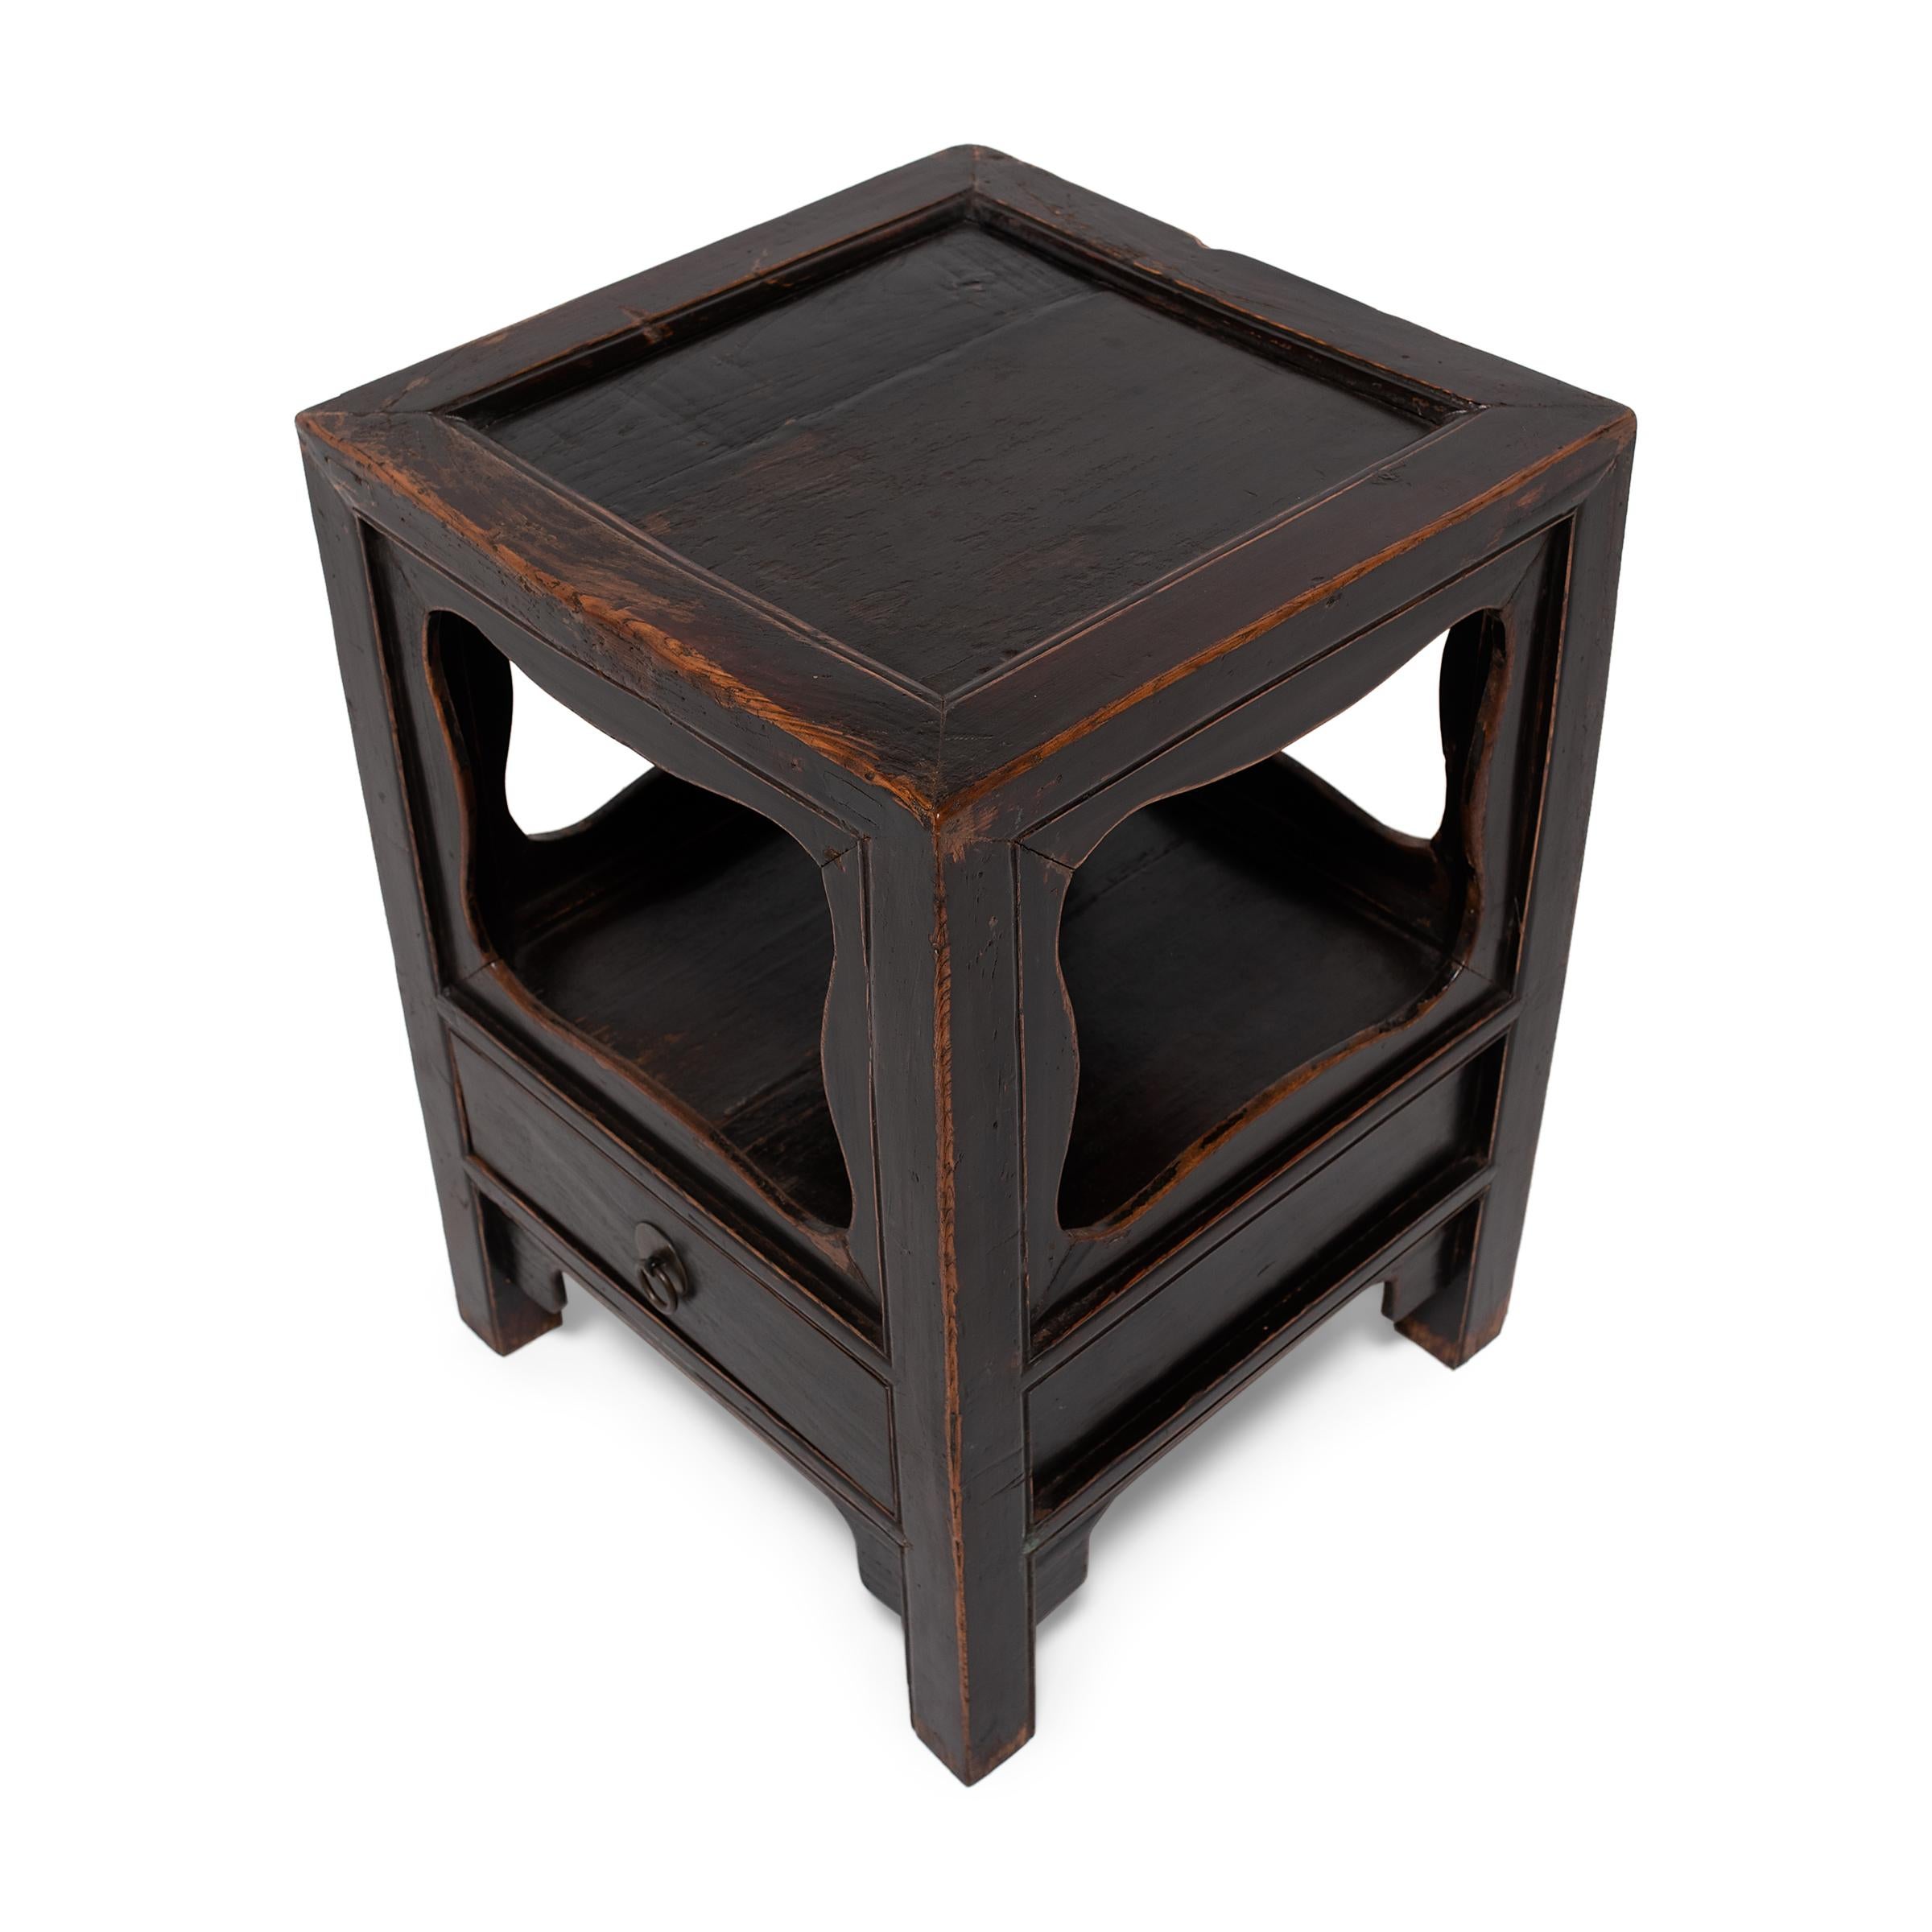 Lacquered Chinese Quadrilobe Side Table, c. 1850